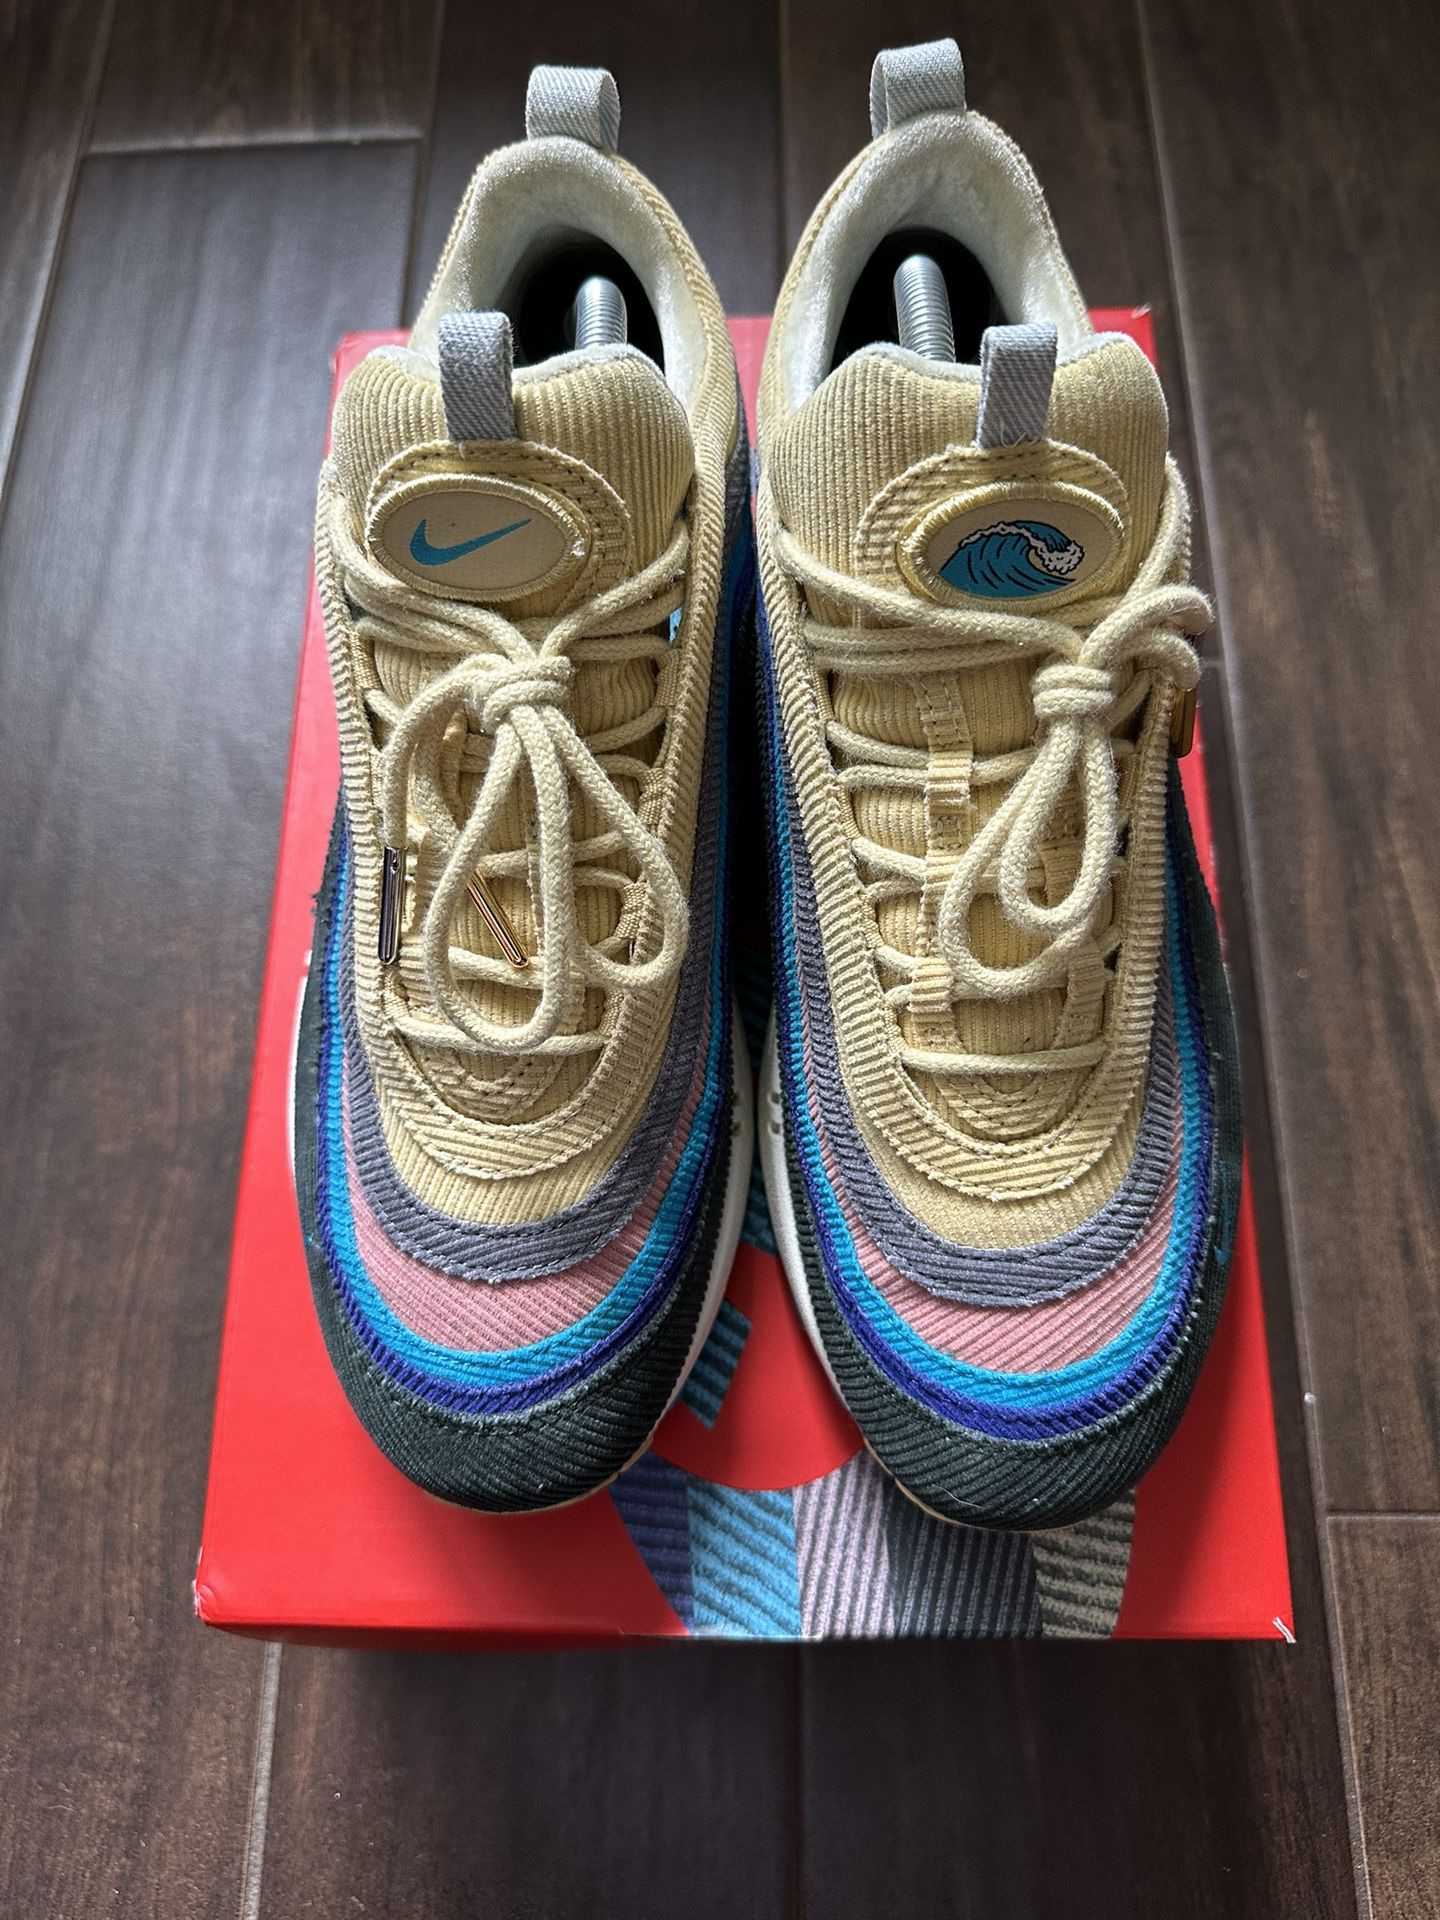 Nike Air Max Sean Wotherspoon Size 8.5 for in Houston, TX - OfferUp